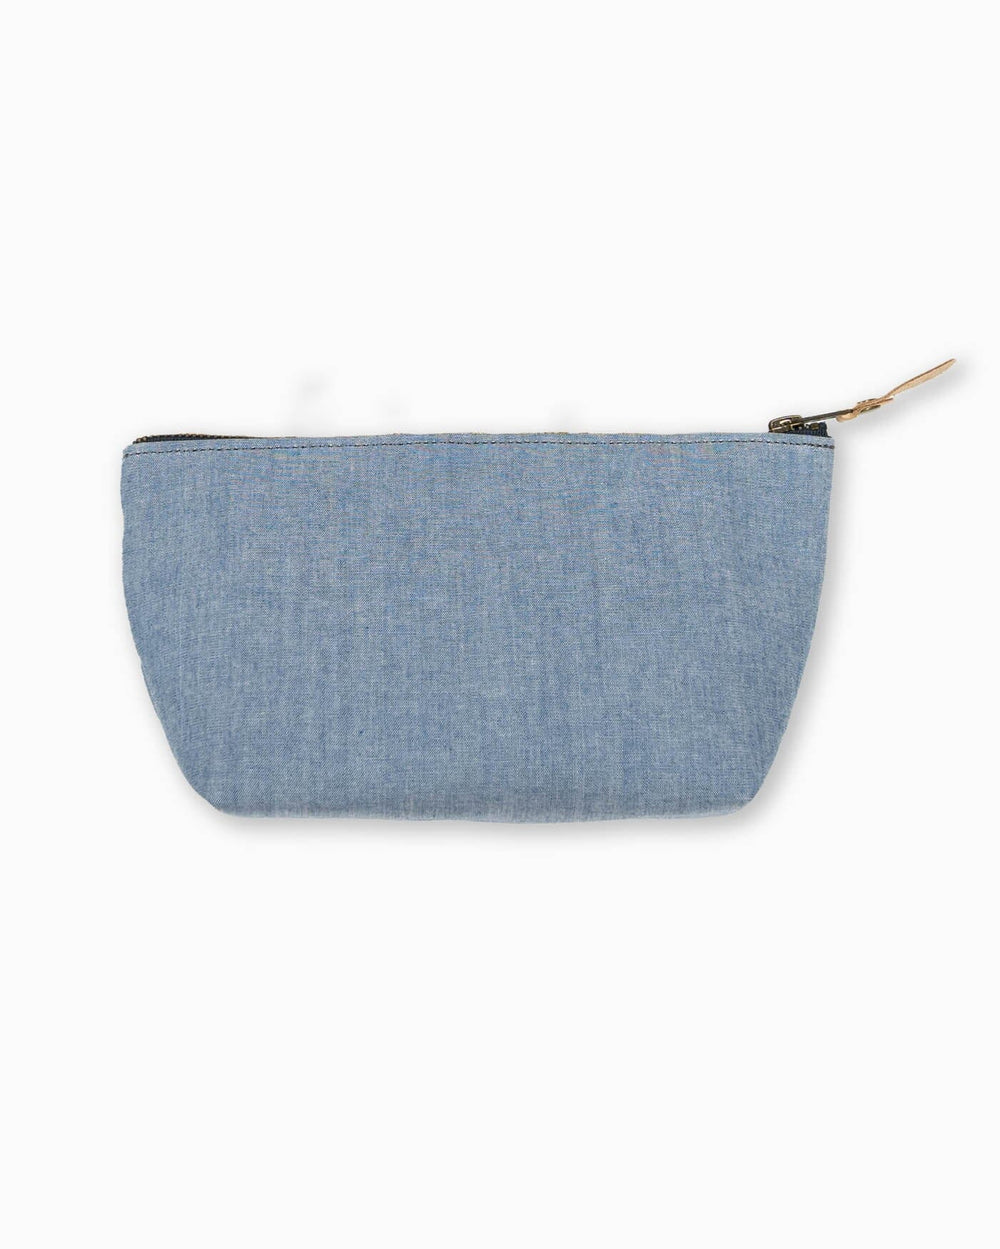 The front view of the Southern Tide Denim Travel Clutch by Southern Tide - Navy